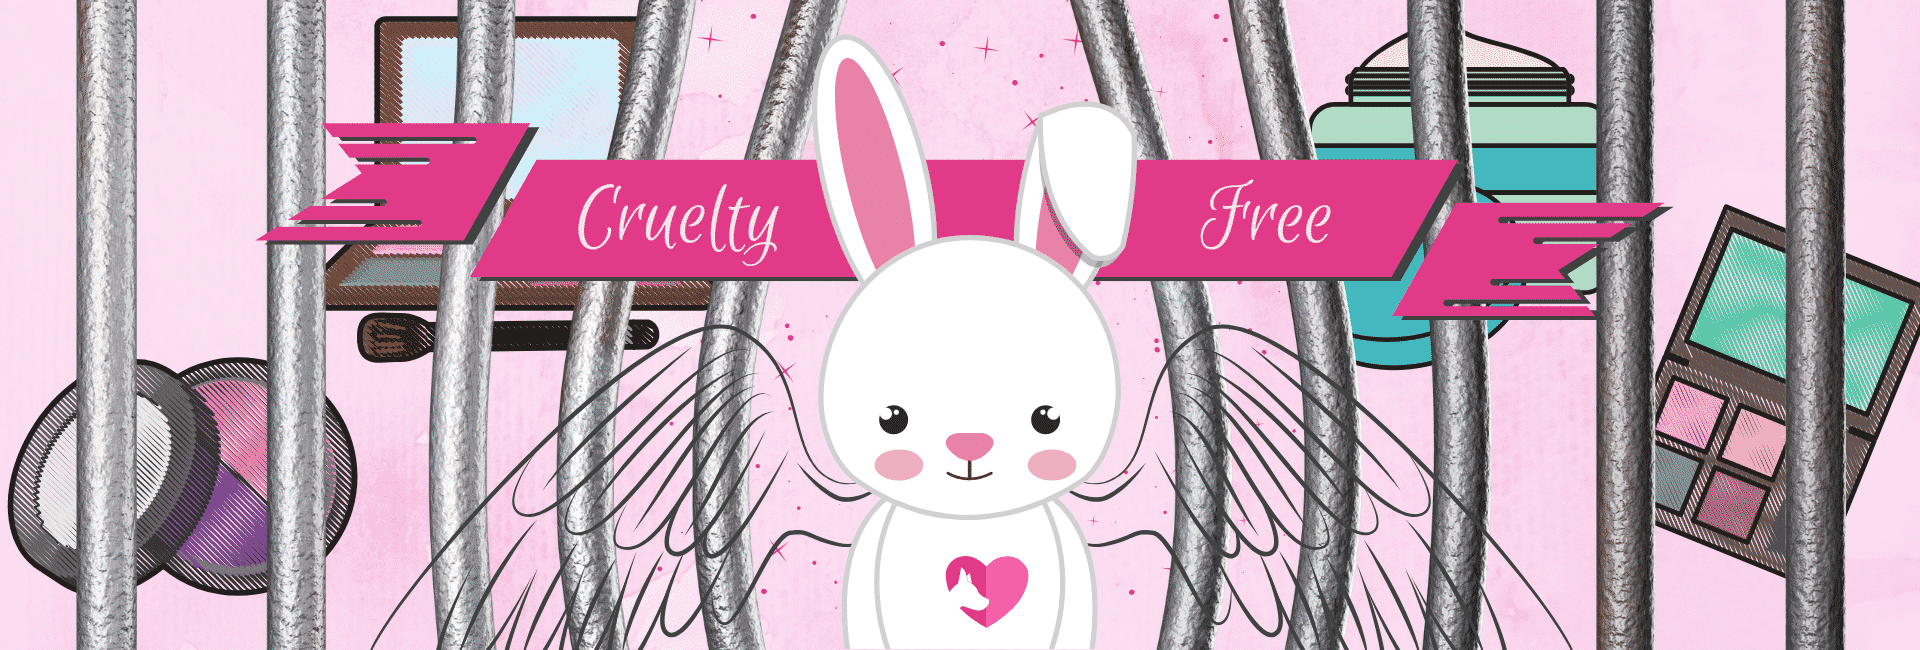 pink graphic showing a cute white bunny that has angel wings looking super sad. The bunny is behind bars. The illustration shows makeup products by the bunny and is part of the illustrations for an article about makeup brands that don't test on animals.